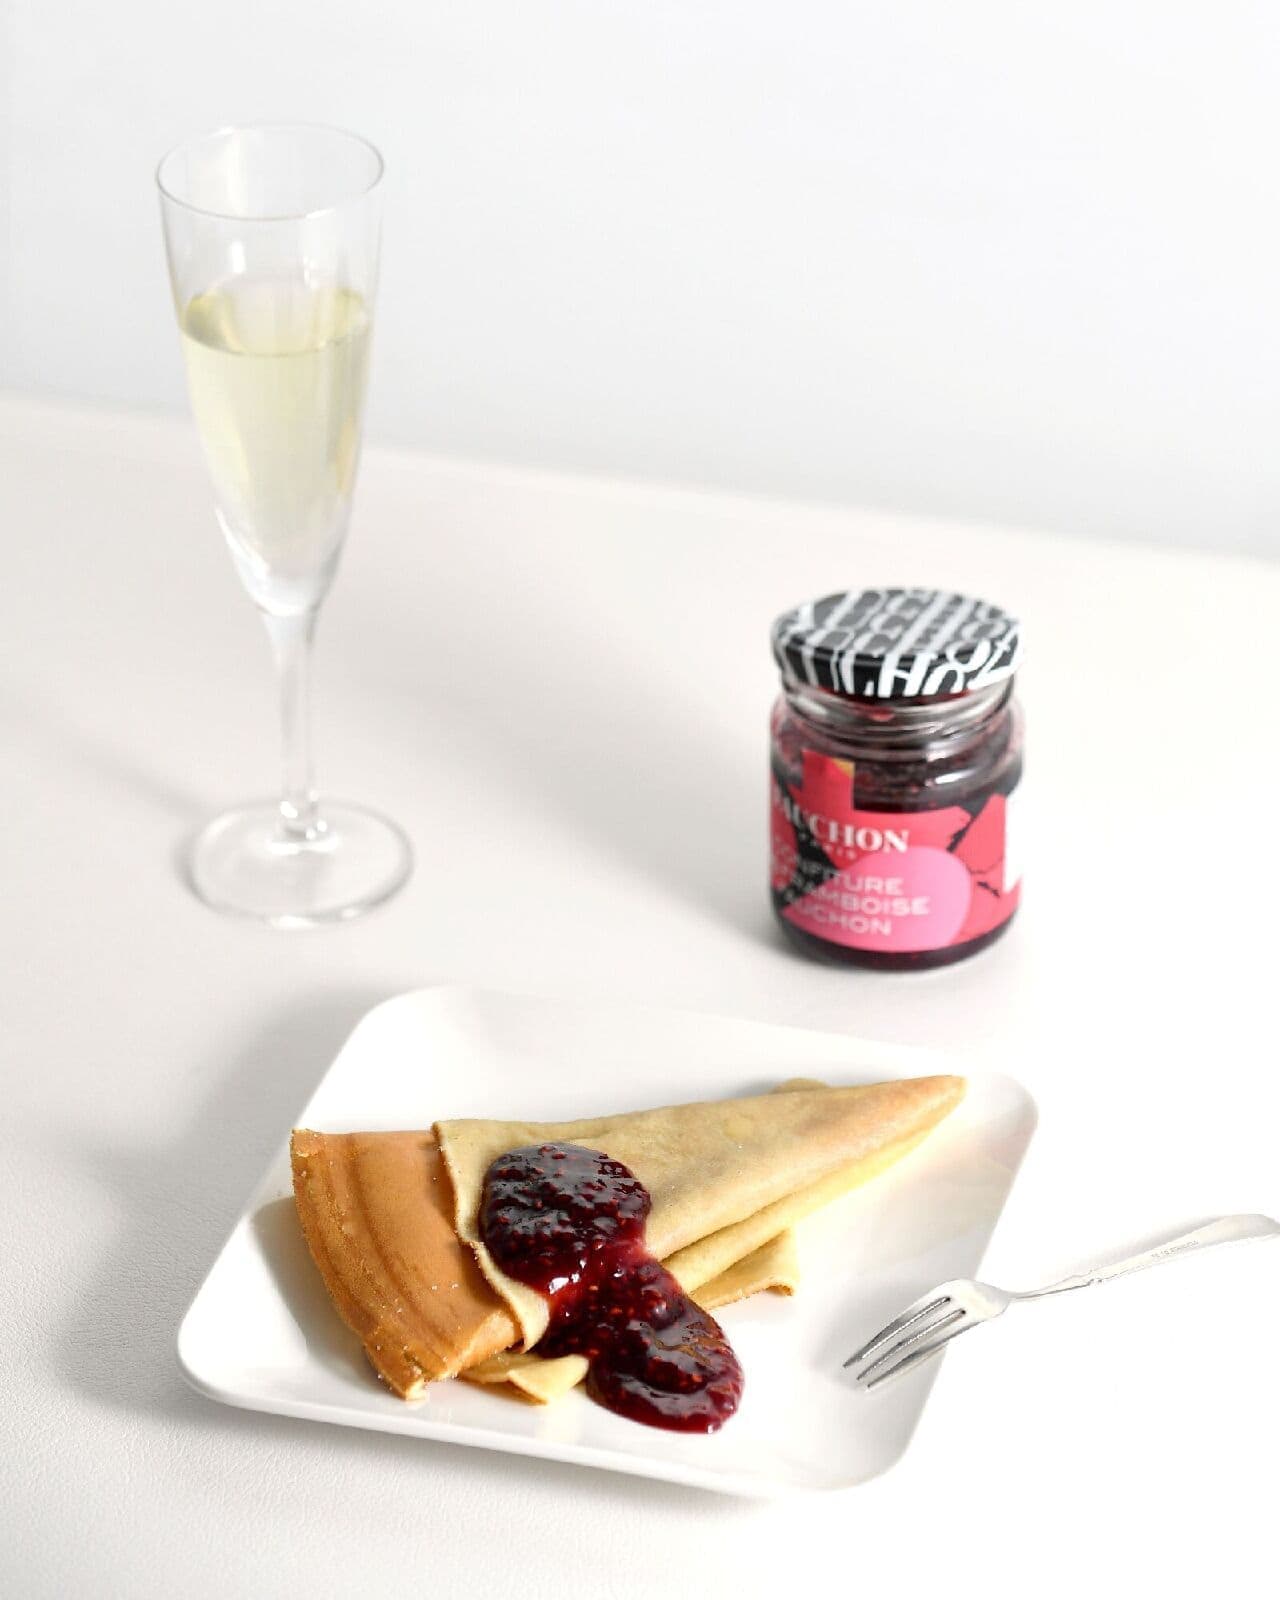 Fauchon "Raspberry Jam with Champagne